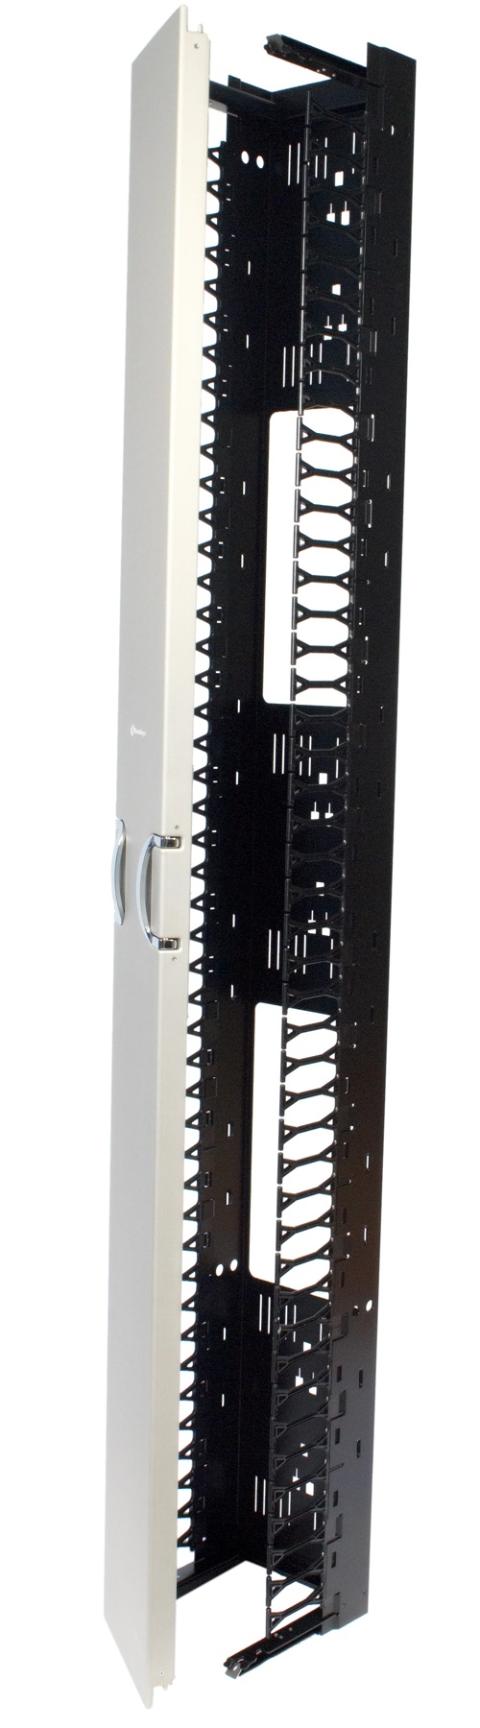 CommScope Vertical Cable Management Kit, 6in x 84in, (2134x152x298mm), Single Sided w. door hin ged both sides, Powder coated  silver. Assembled